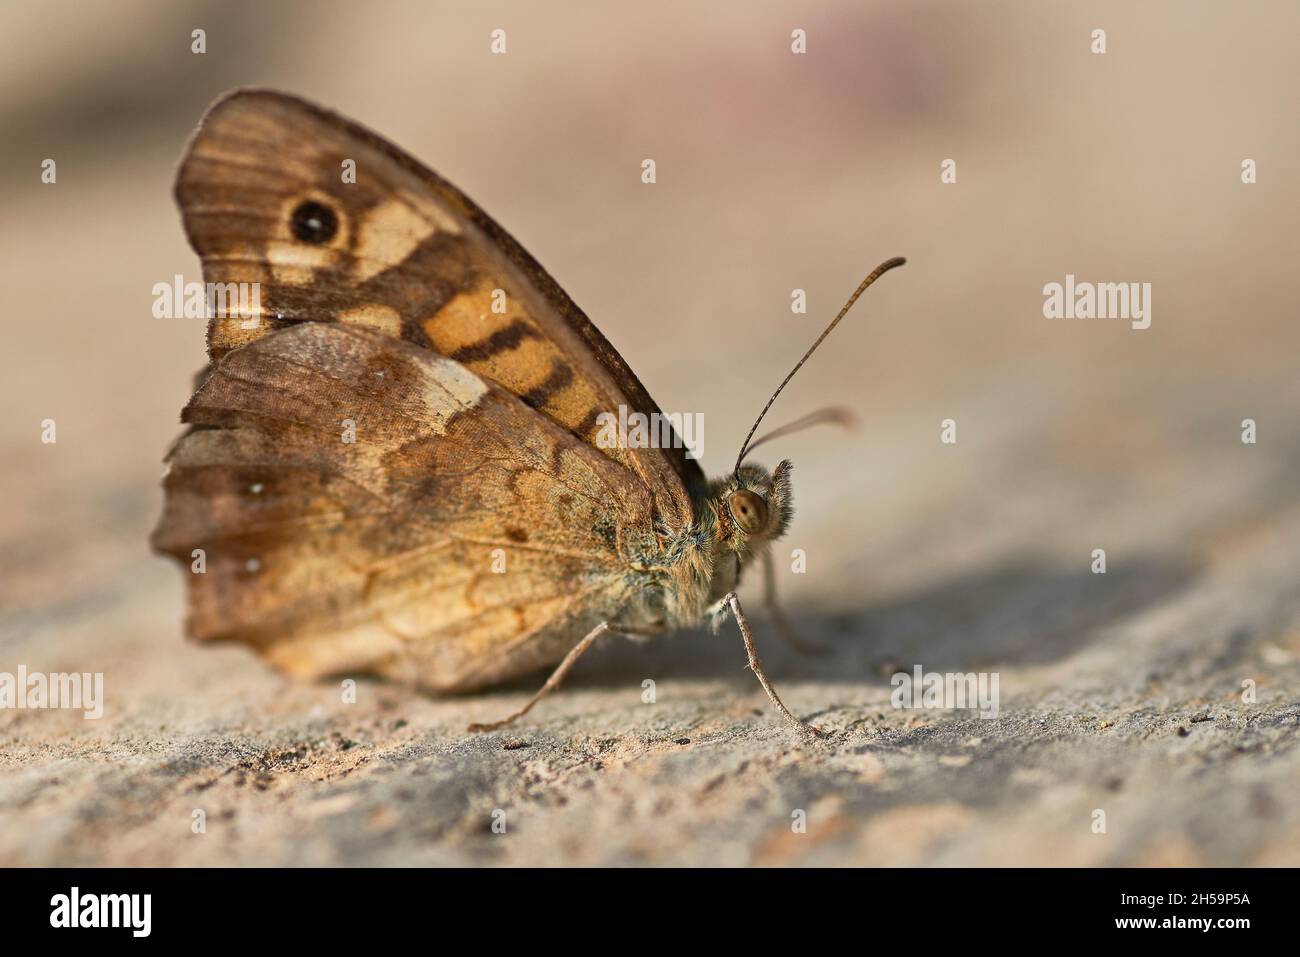 Pararge aegeria, butterfly commonly named 'Speckled wood'. Stock Photo